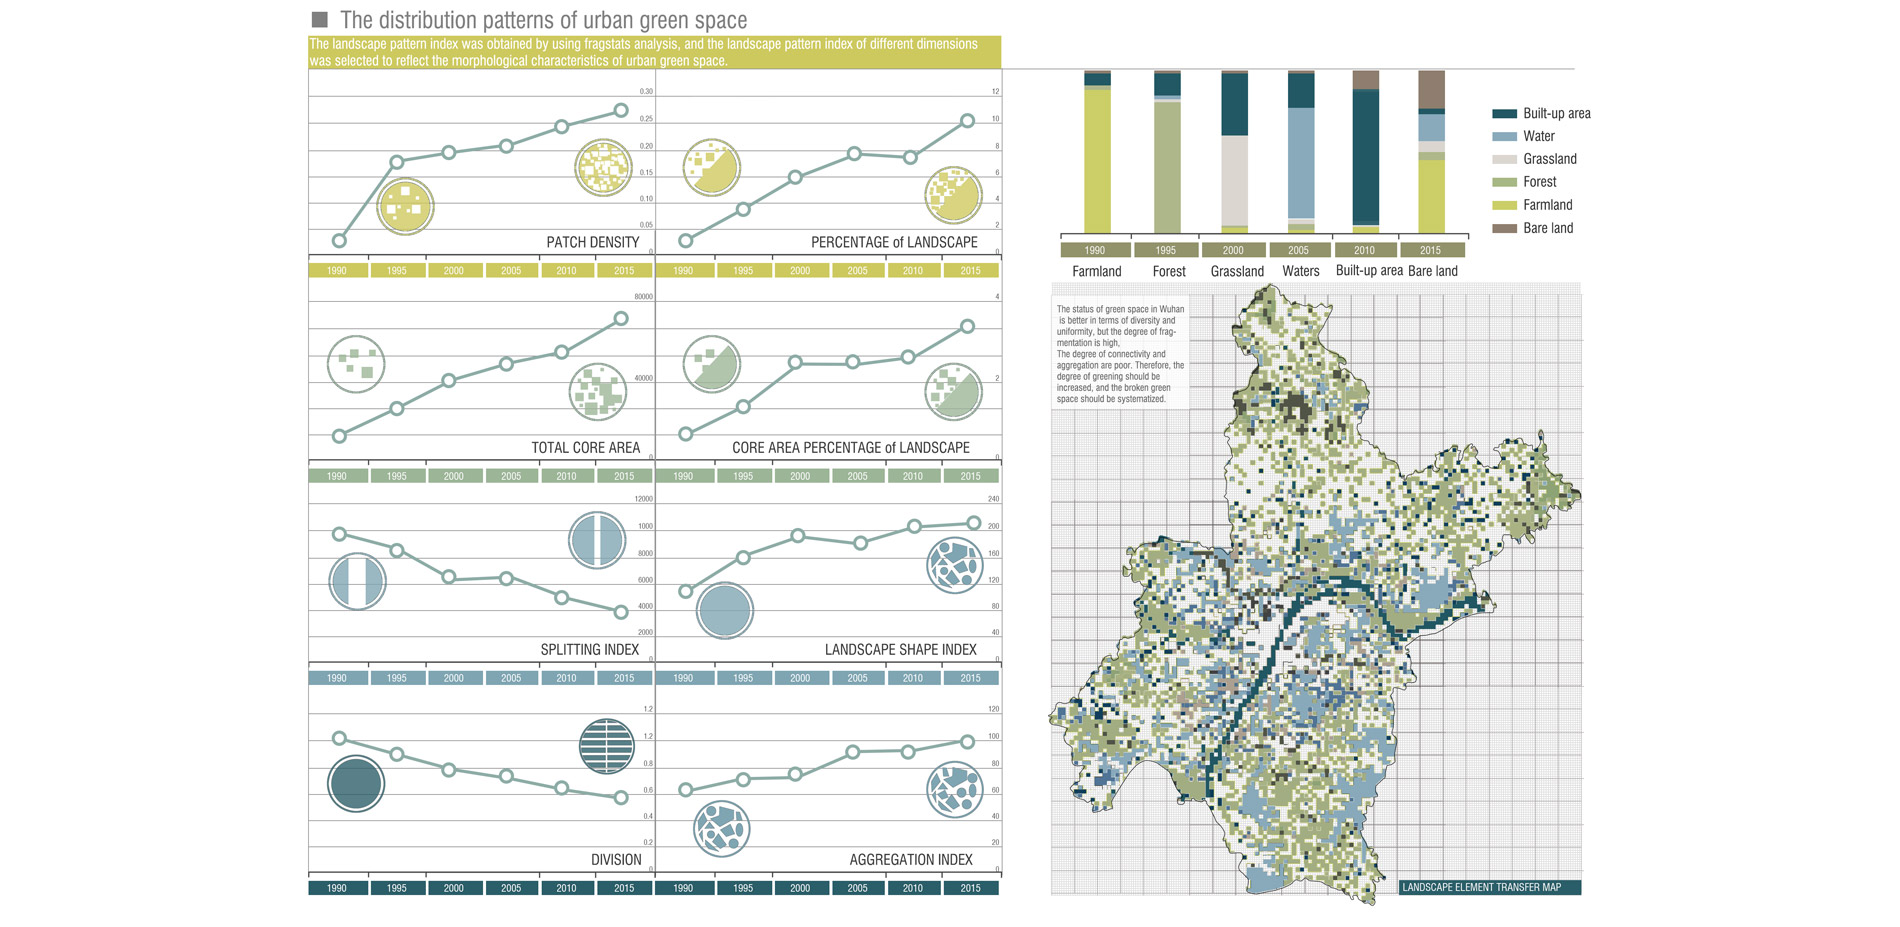 The distribution patterns of urban green space